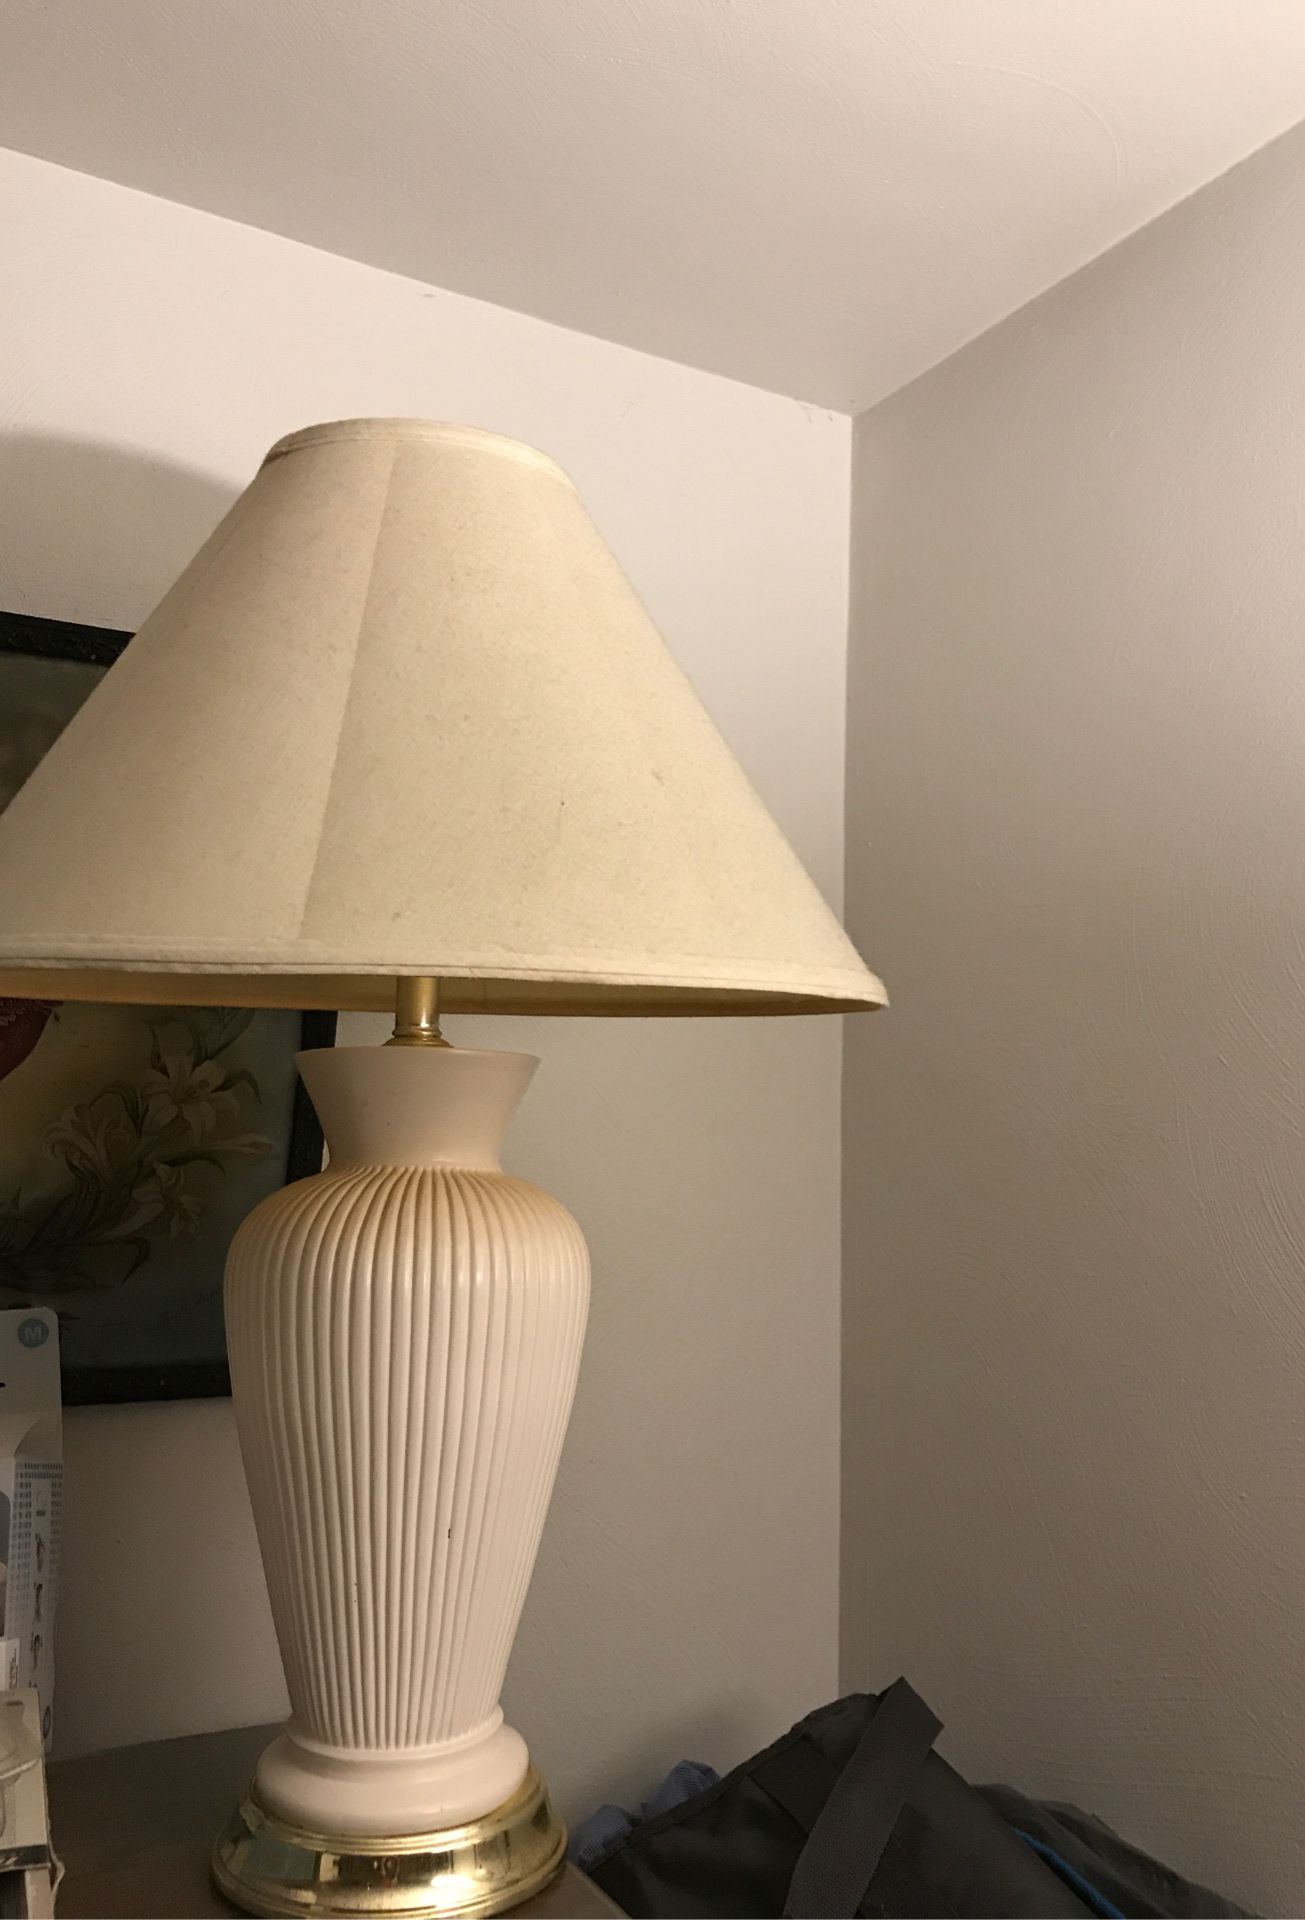 FREE Large touch lamp